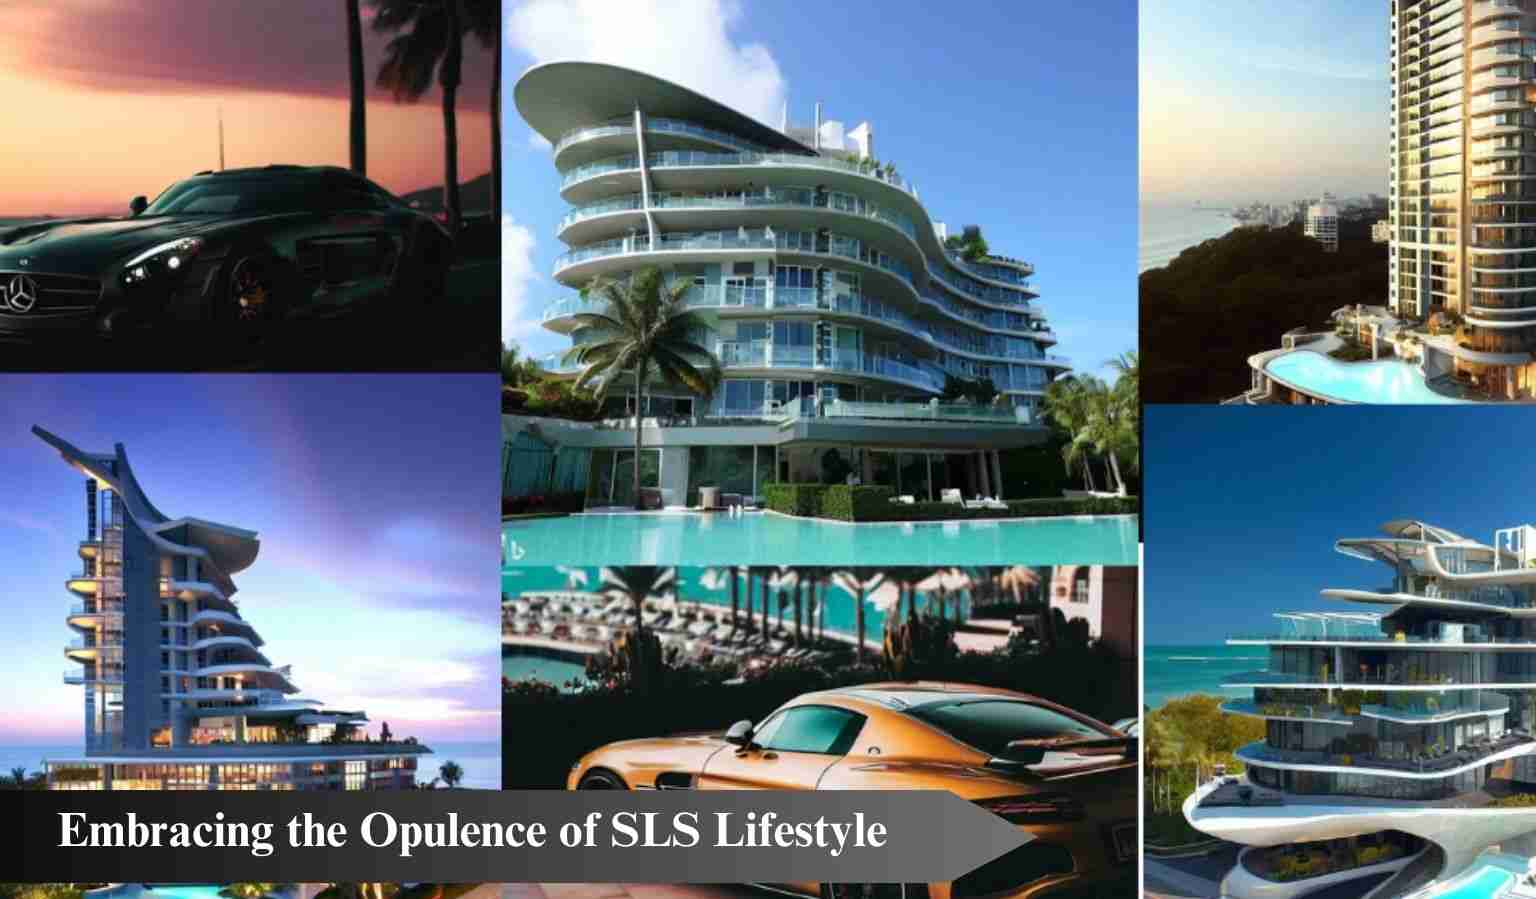 Embracing the Opulence of SLS Lifestyle